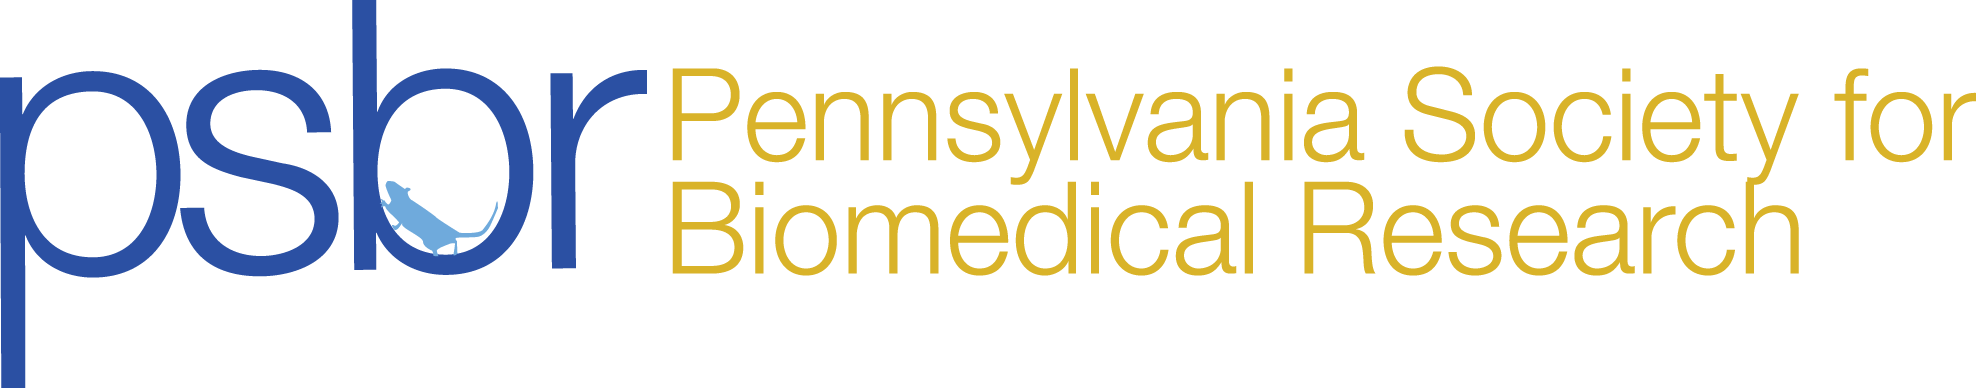 Pennsylvania Society for Biomedical Research